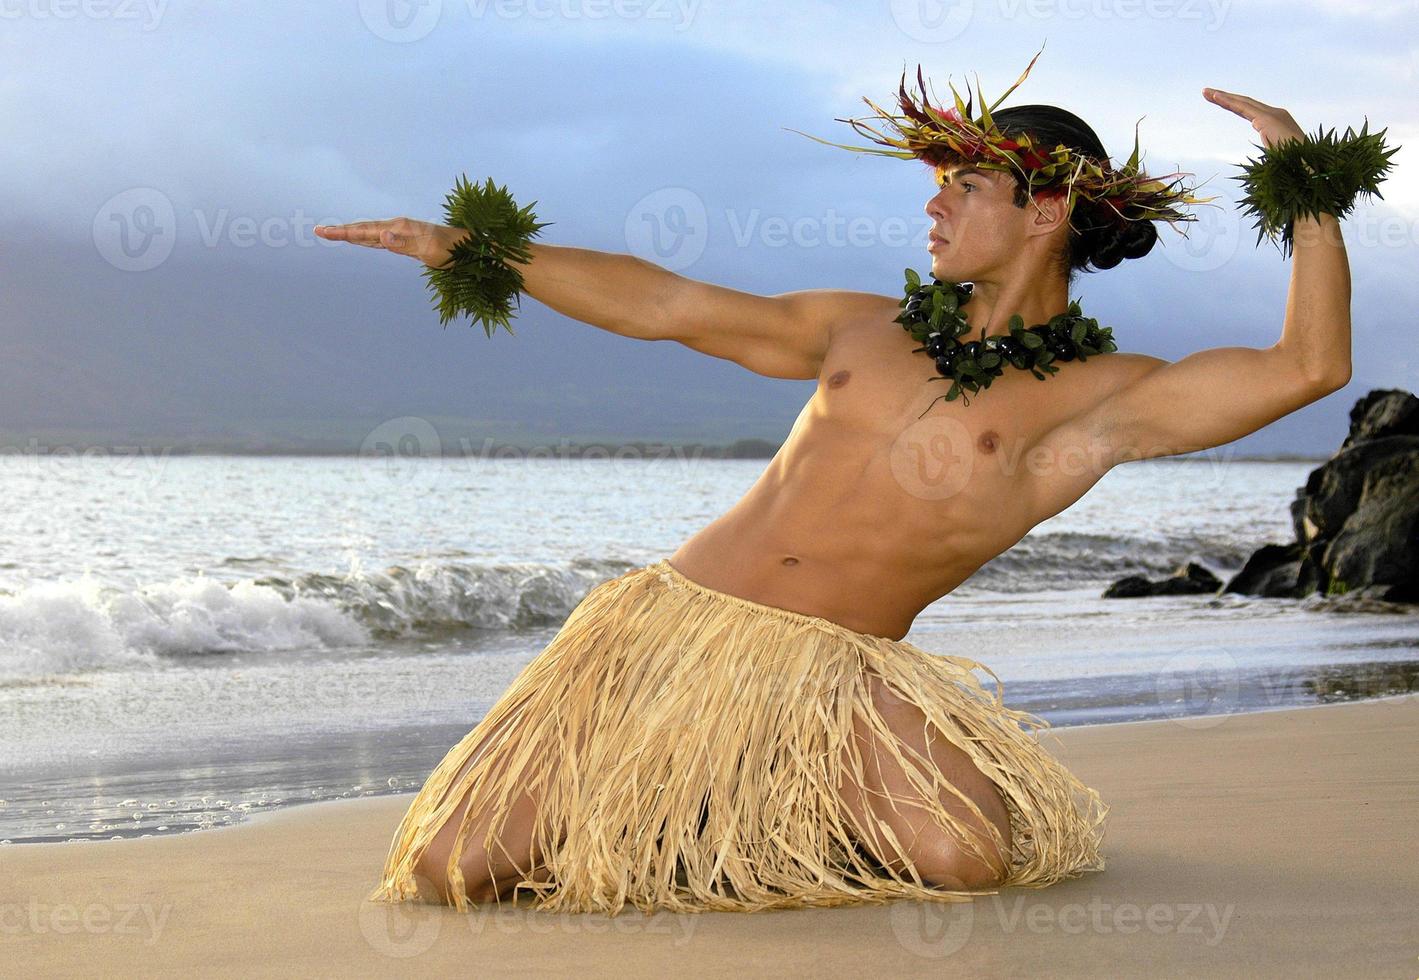 This very handsome male hula dancer is posed in a traditional position on the sand right on the wet sand next to the ocean. photo